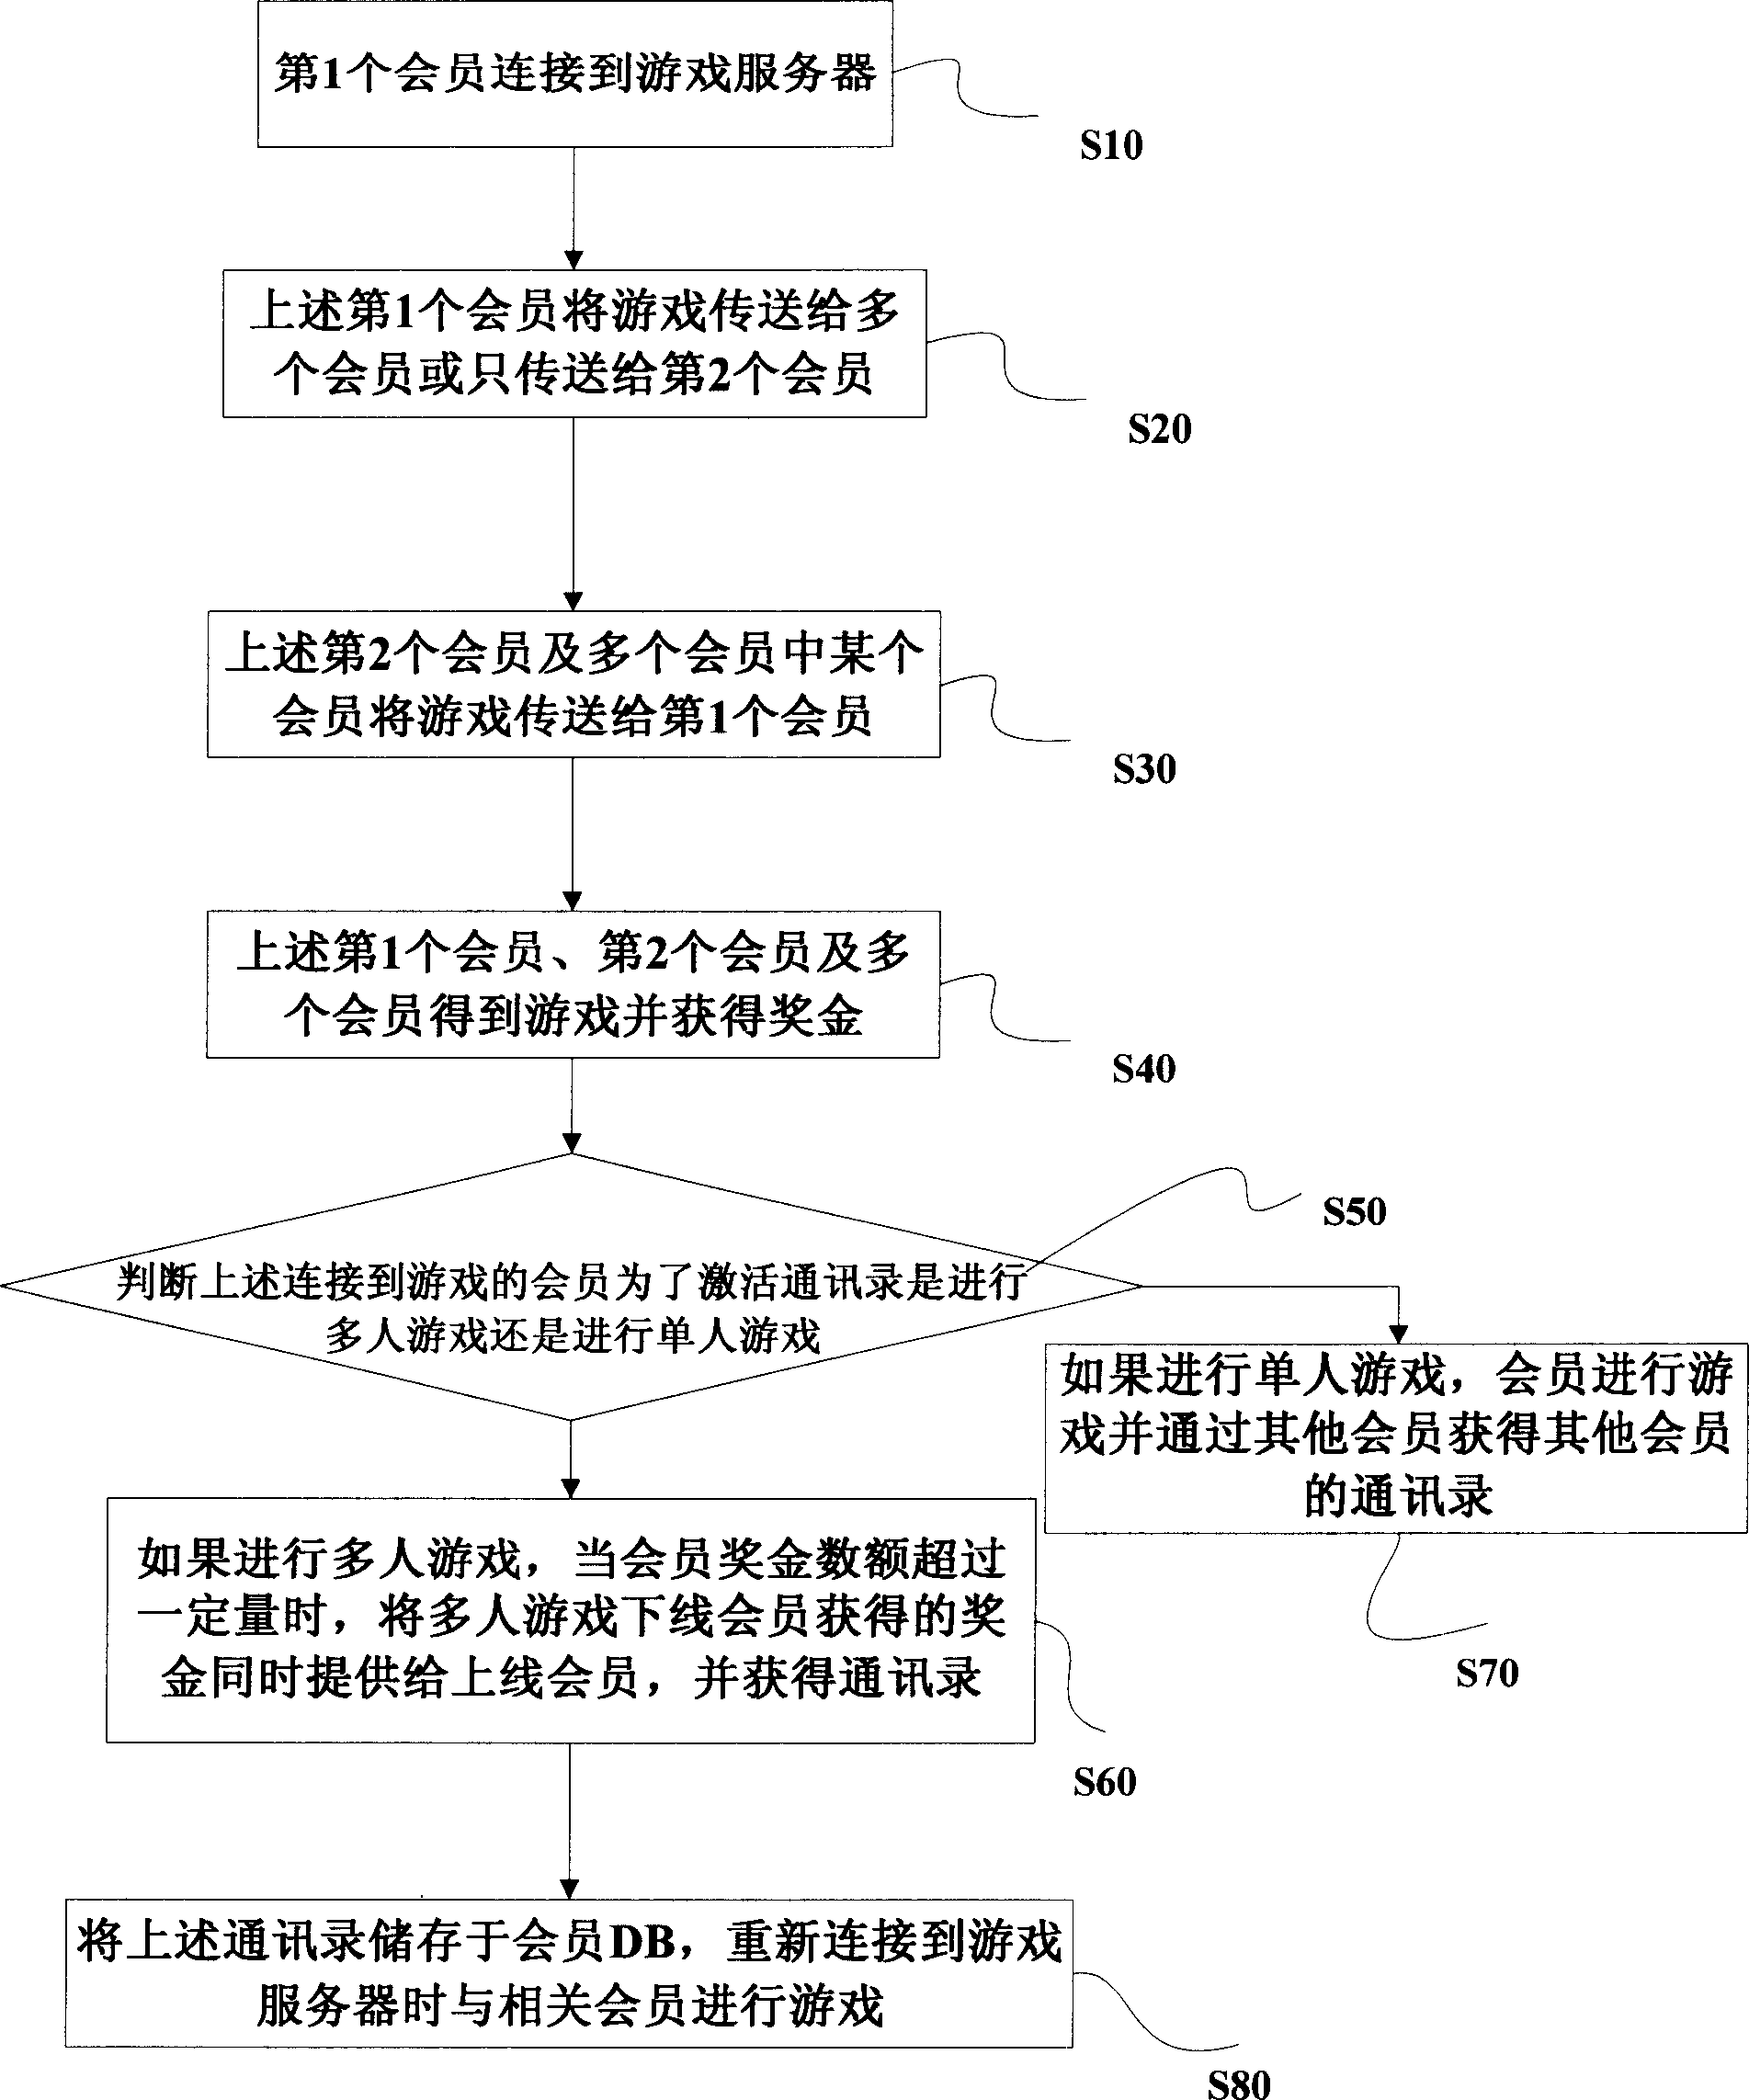 Method for activating communication and address list using games